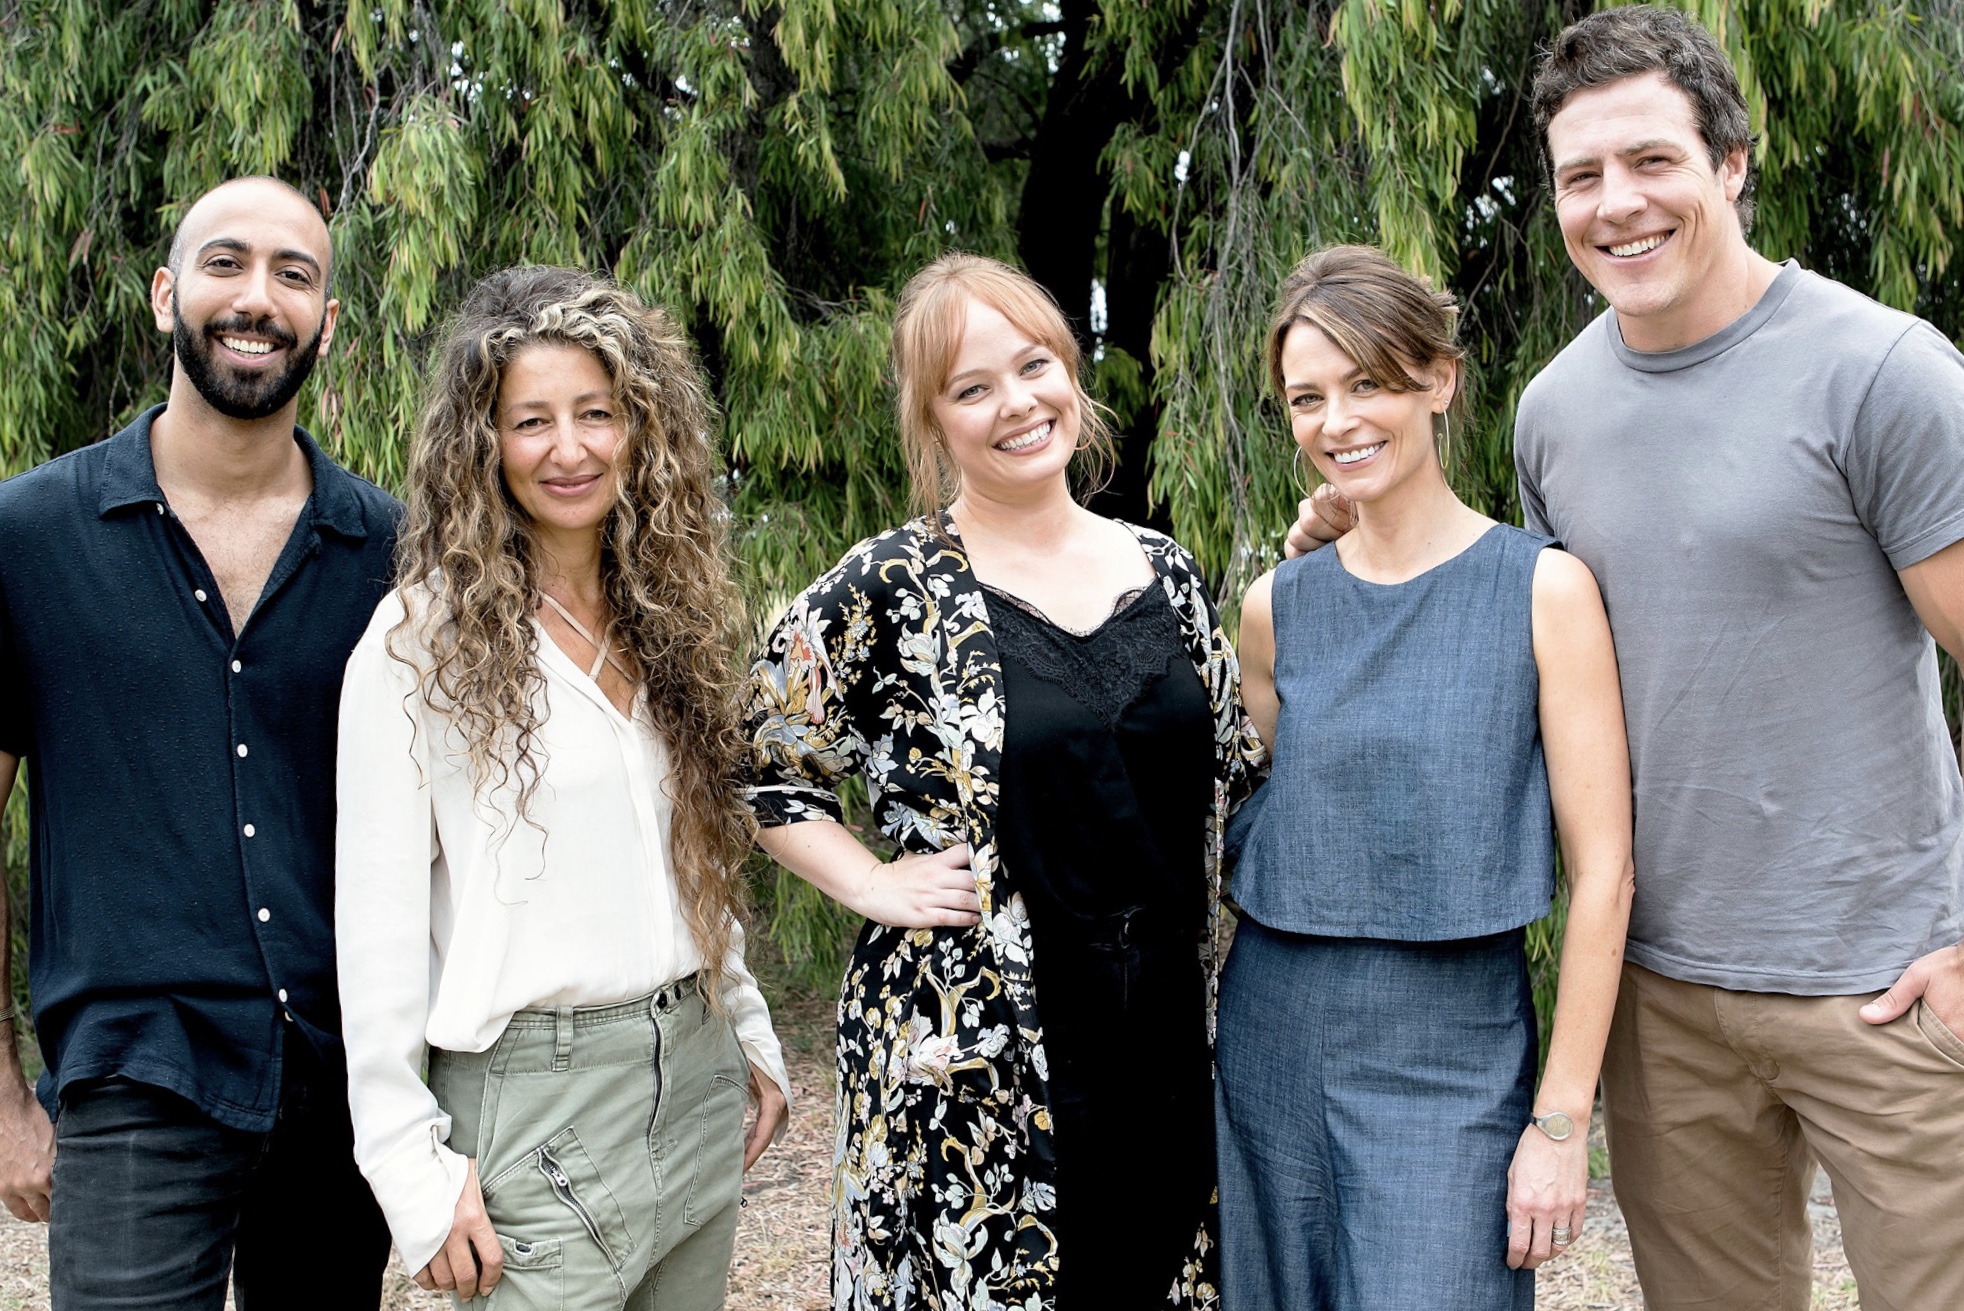   The cast of Five Bedrooms   images - 10 